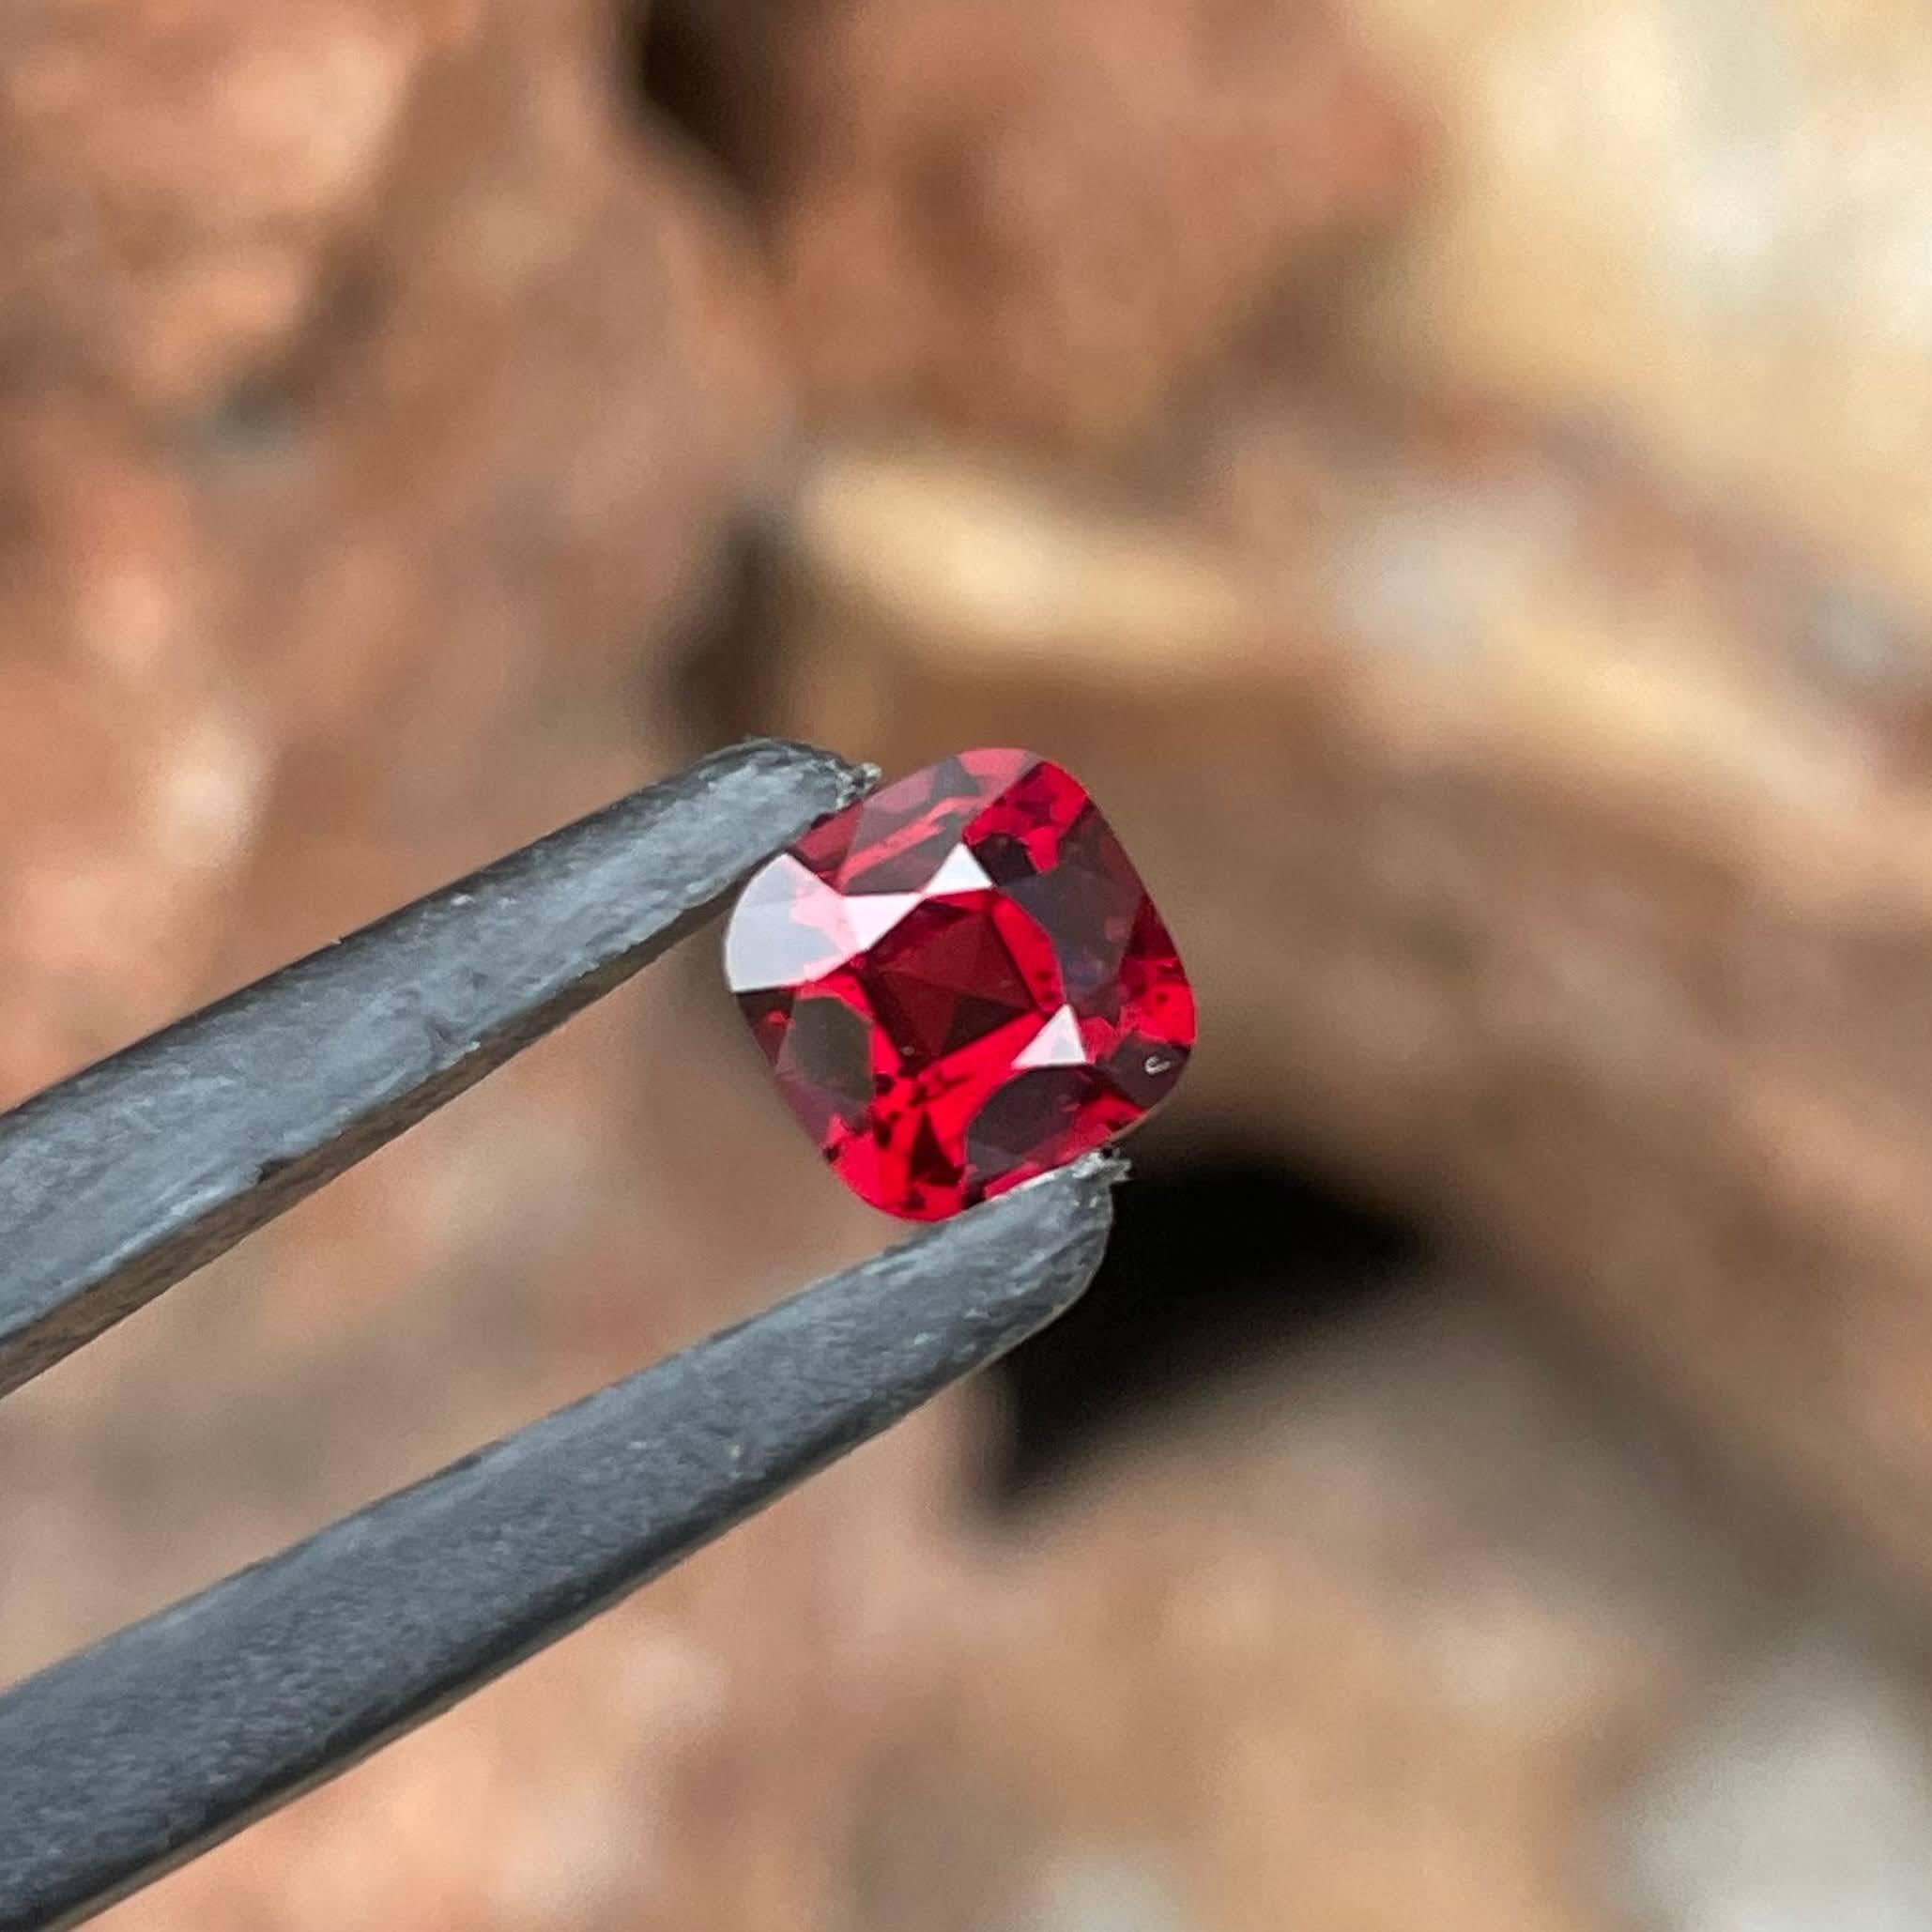 Weight 1.45 carats 
Dimensions 6.35x6.35x4.25 mm
Treatment none 
Origin Burma 
Clarity VVS
Shape cushion 
Cut fancy cushion 




Behold the allure of this exquisite 1.45 carats Natural Red Burmese Spinel, a gemstone of unparalleled beauty and